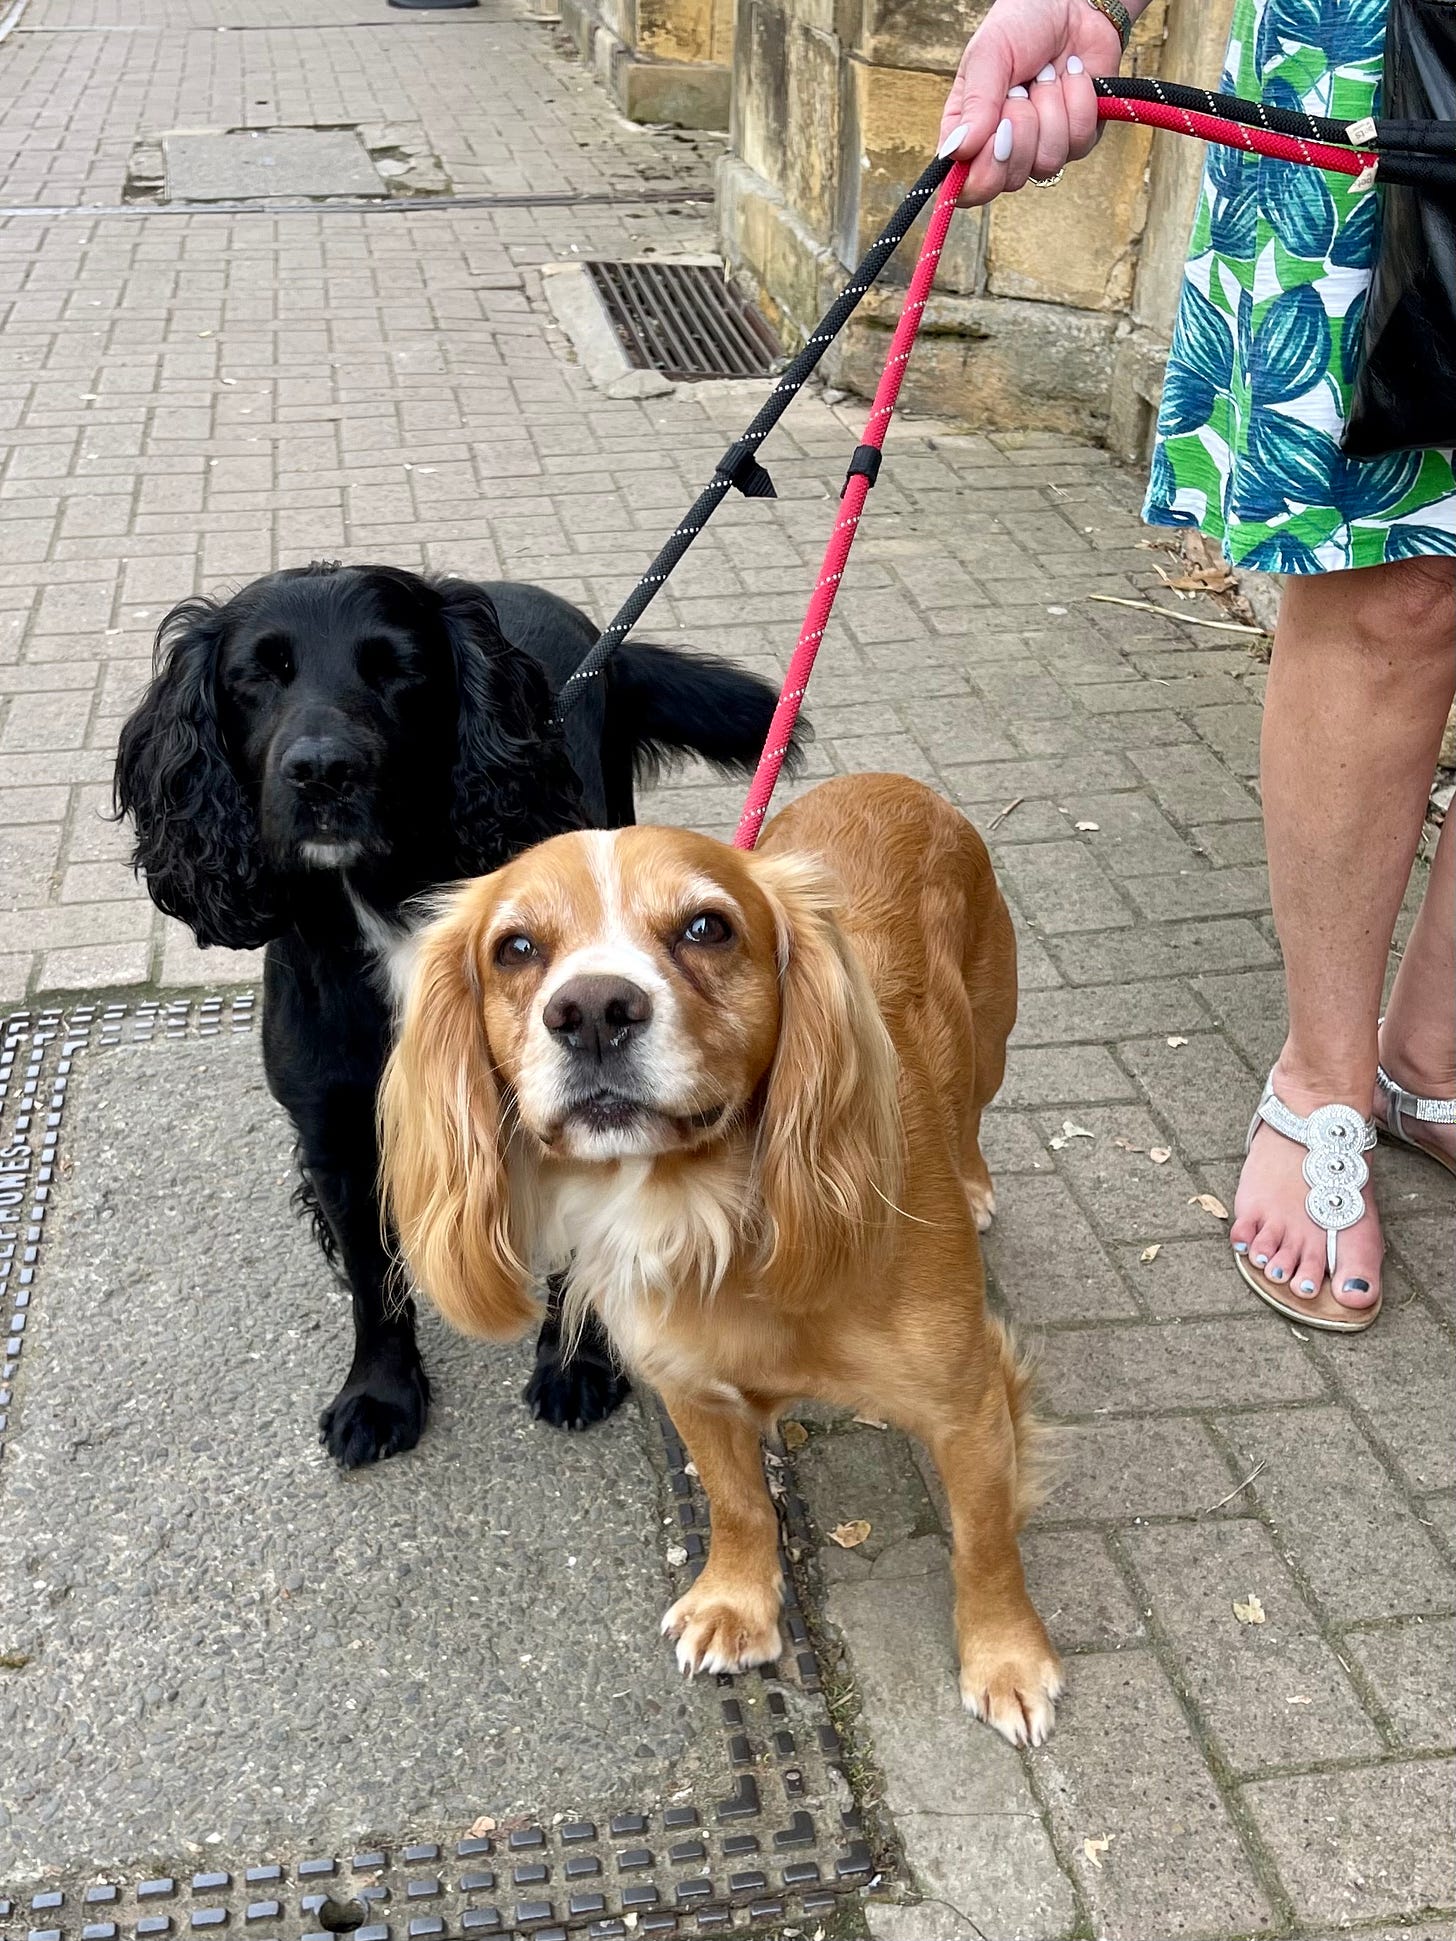 two young working Cocker Spaniel dogs, one black colored, the other tan colored on the sidewalk in Chipping Campden, England